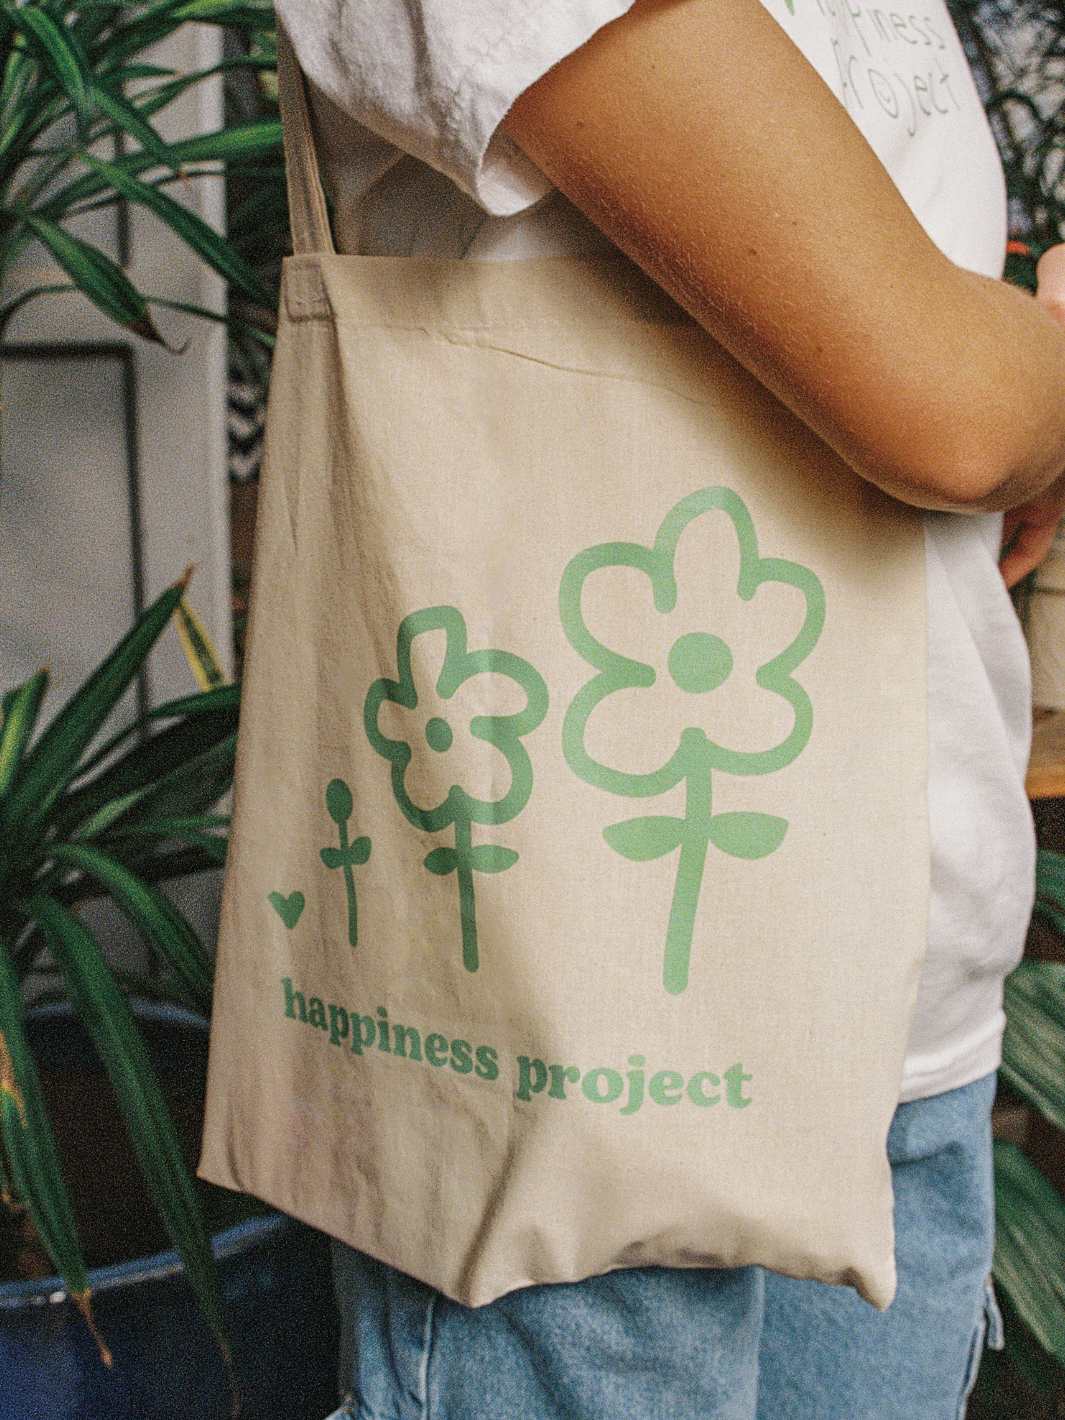 "Growth Is A Process" Tote Bag